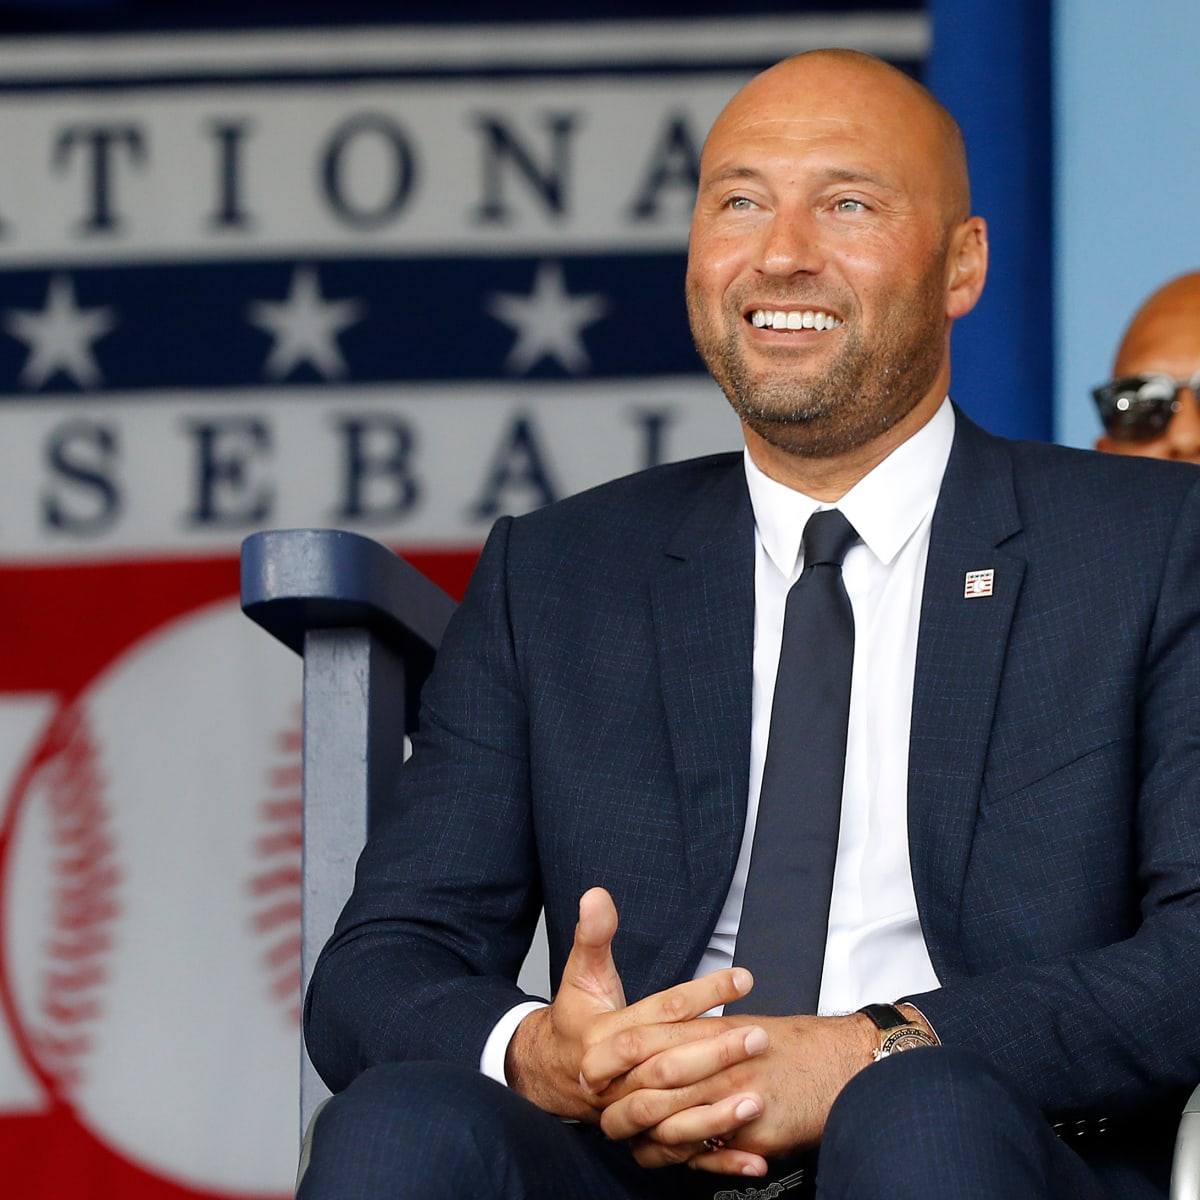 For Derek Jeter, Larry Walker and Ted Simmons, Hall of Fame induction was  worth the wait - Sports Collectors Digest